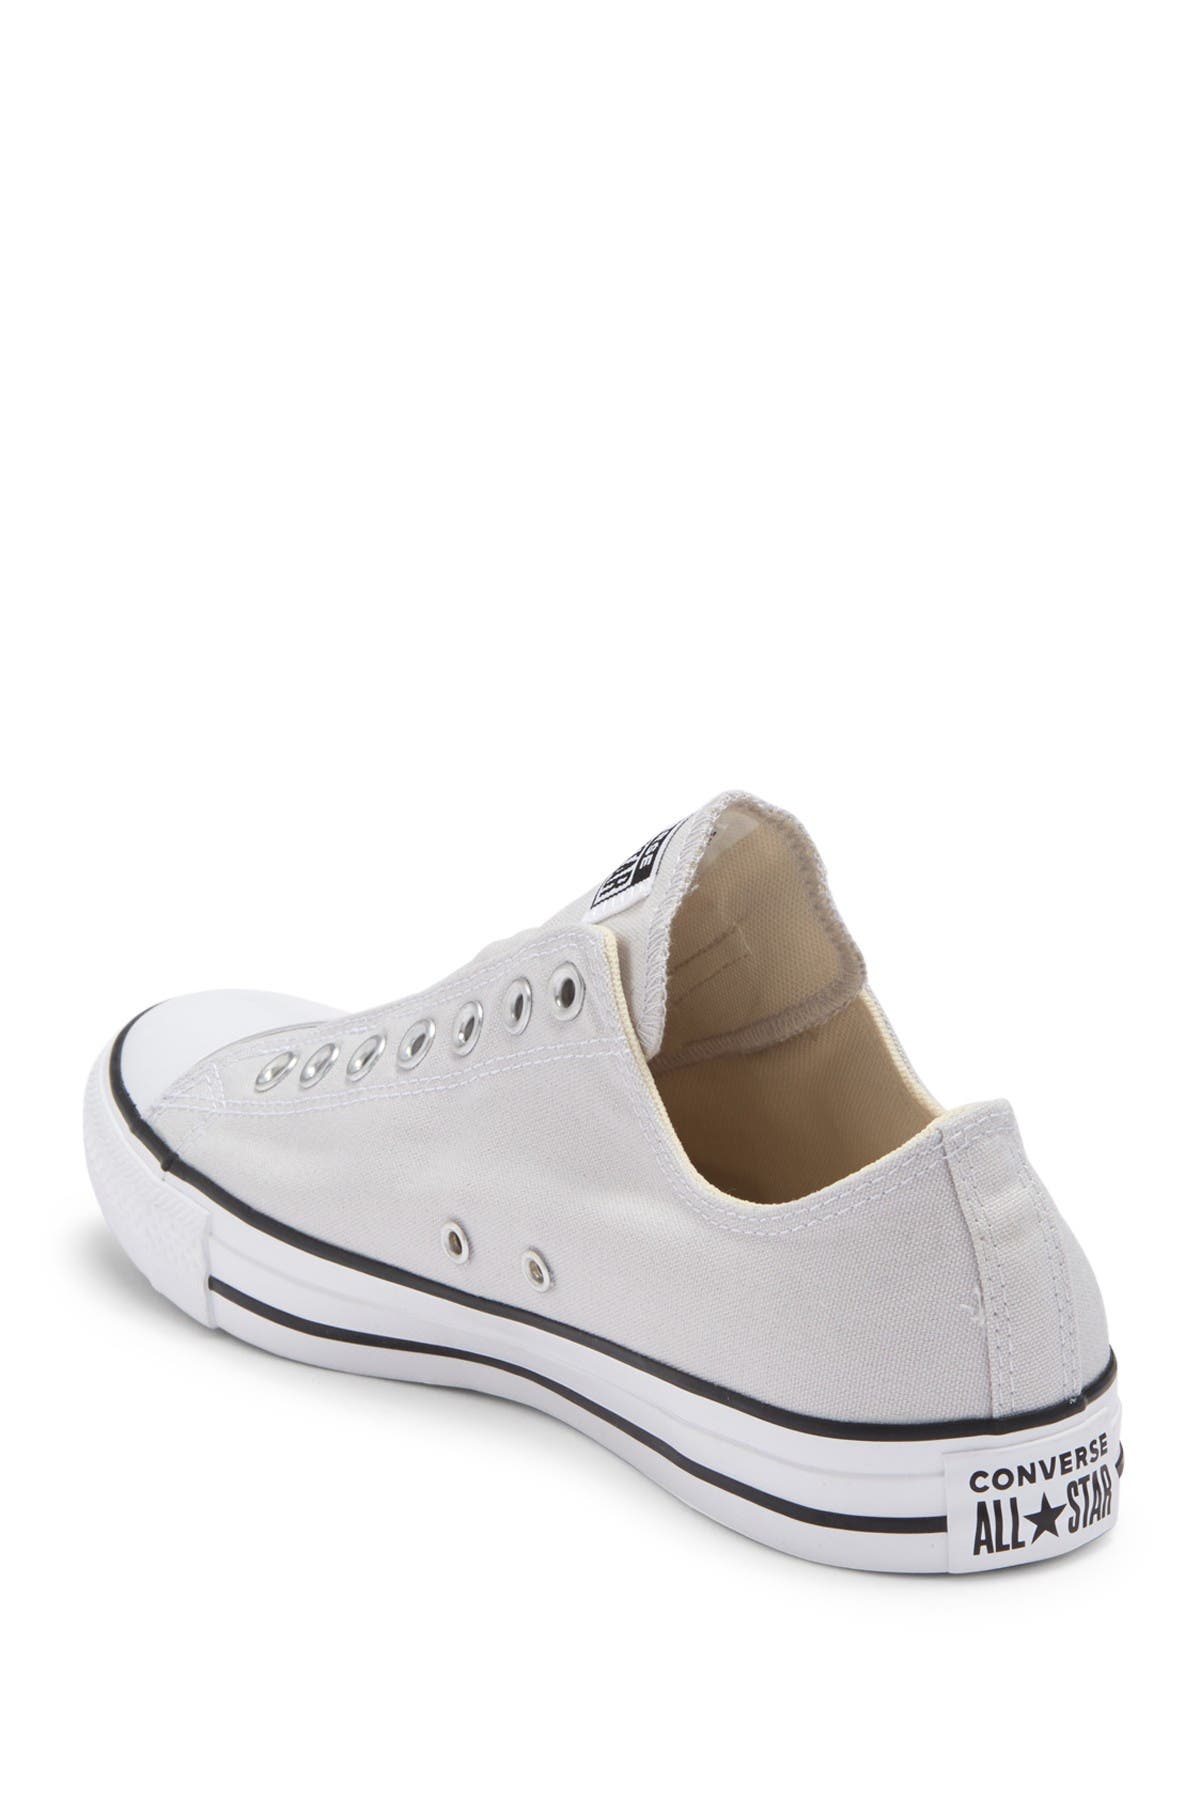 Converse | Chuck Taylor All Star Laceless Slip-On Sneaker | Nordstrom Rack